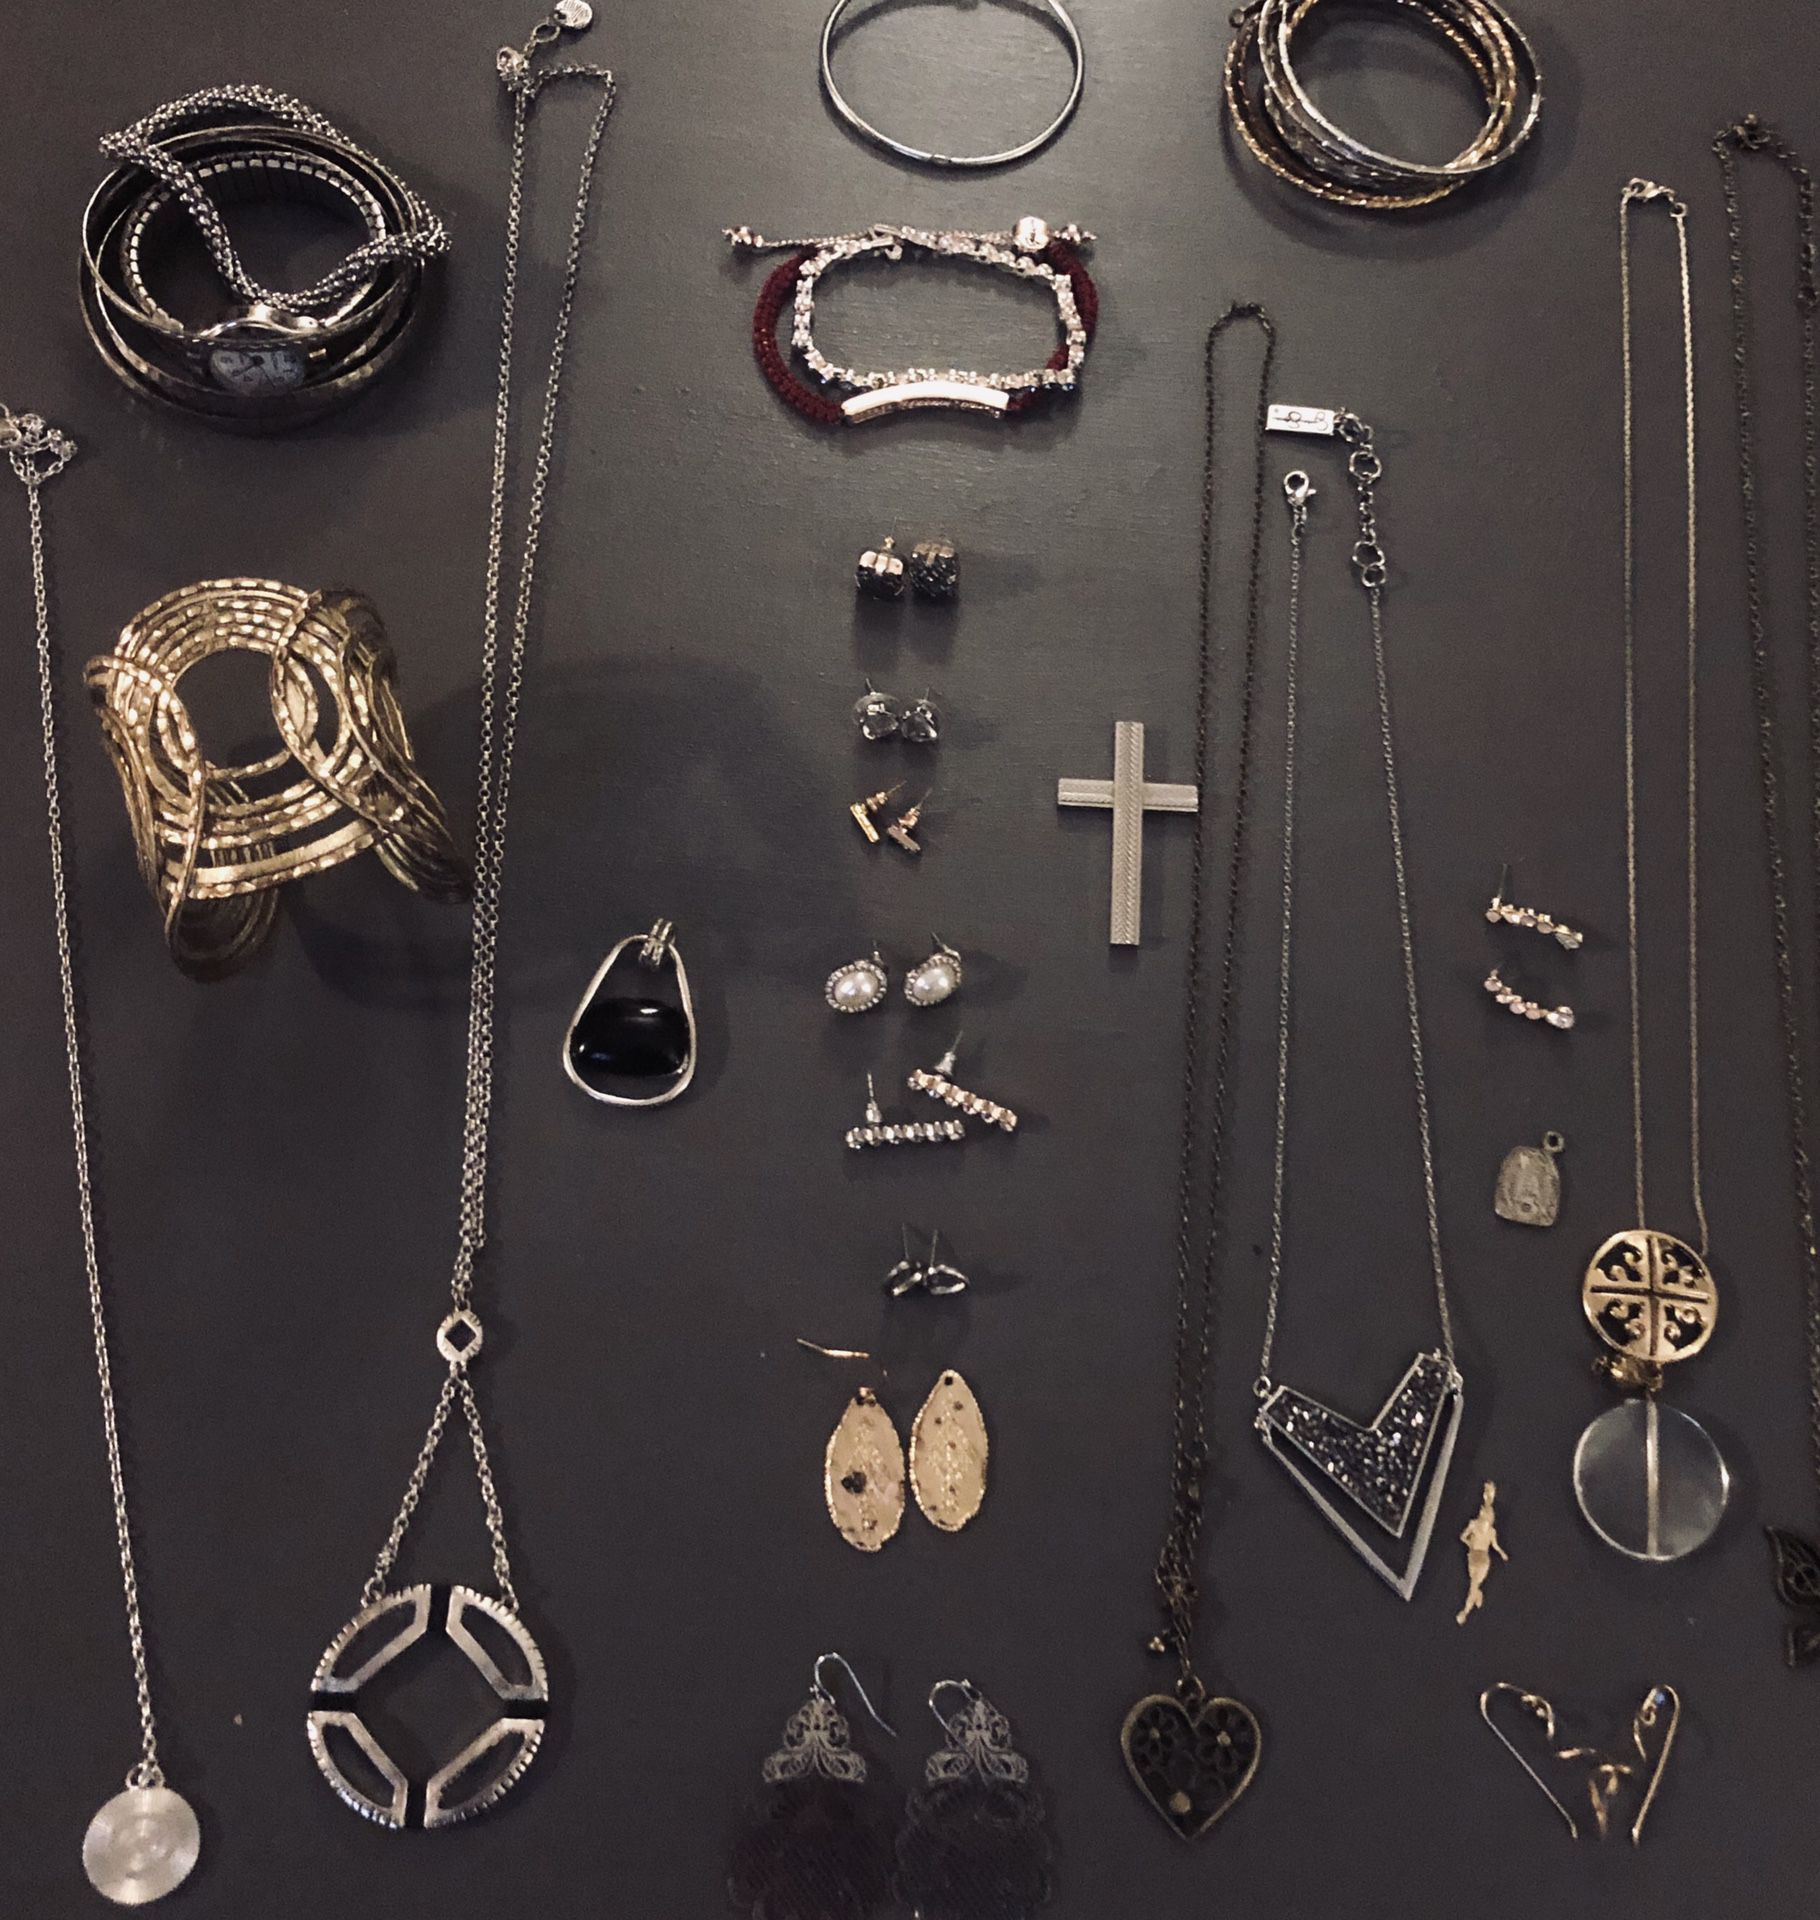 My jewelry collection/design